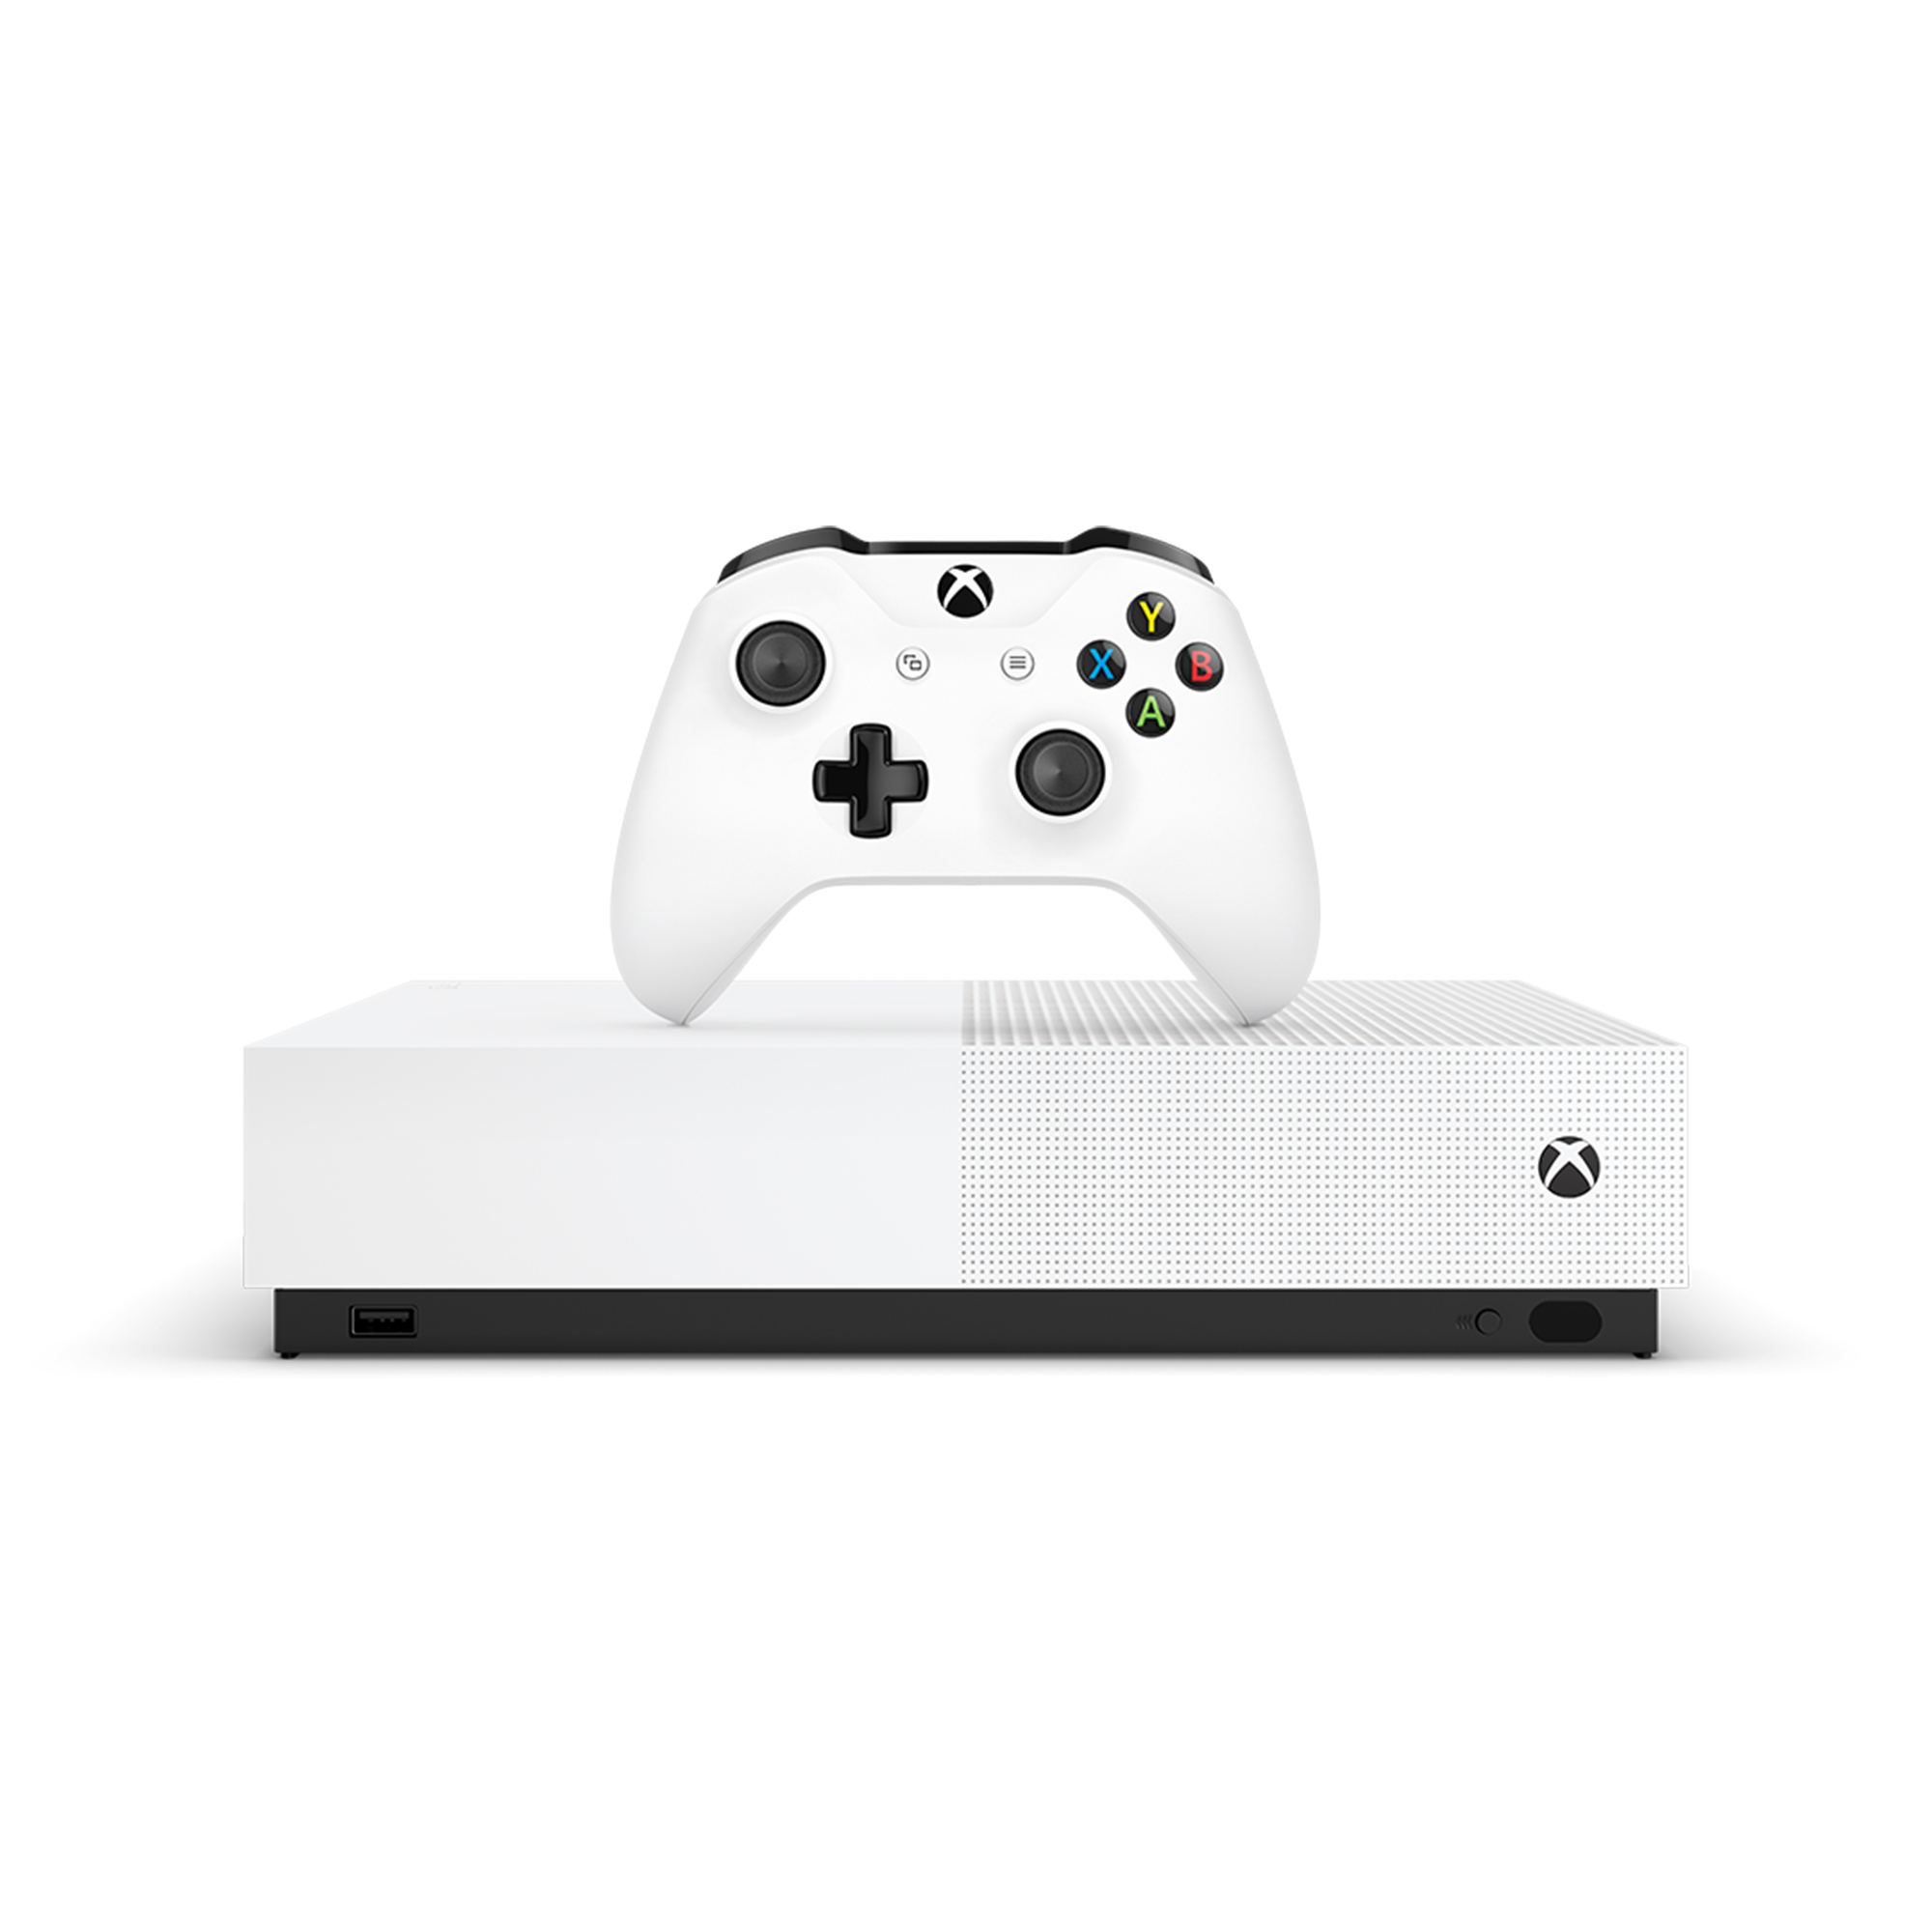 Microsoft Xbox One S 1TB All Digital Edition 3 Game Bundle (Disc-free Gaming), White, NJP-00050 - image 7 of 13